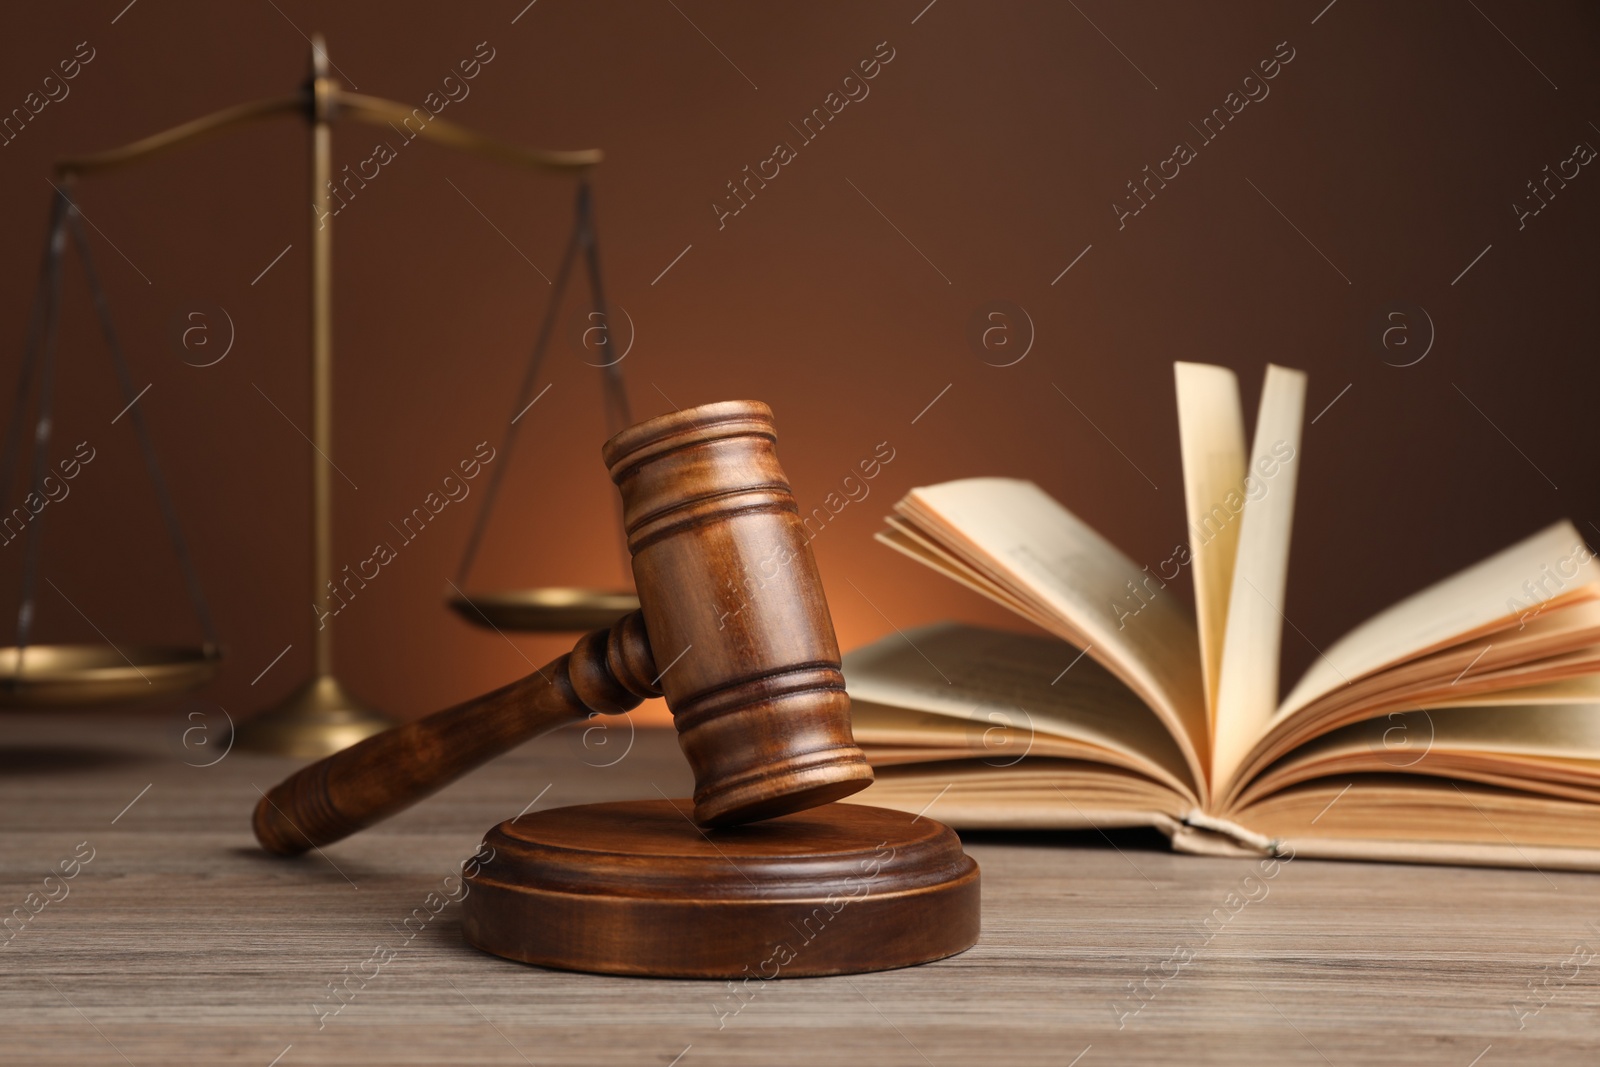 Photo of Judge's gavel with sound block, scales of justice and book on wooden table against brown background